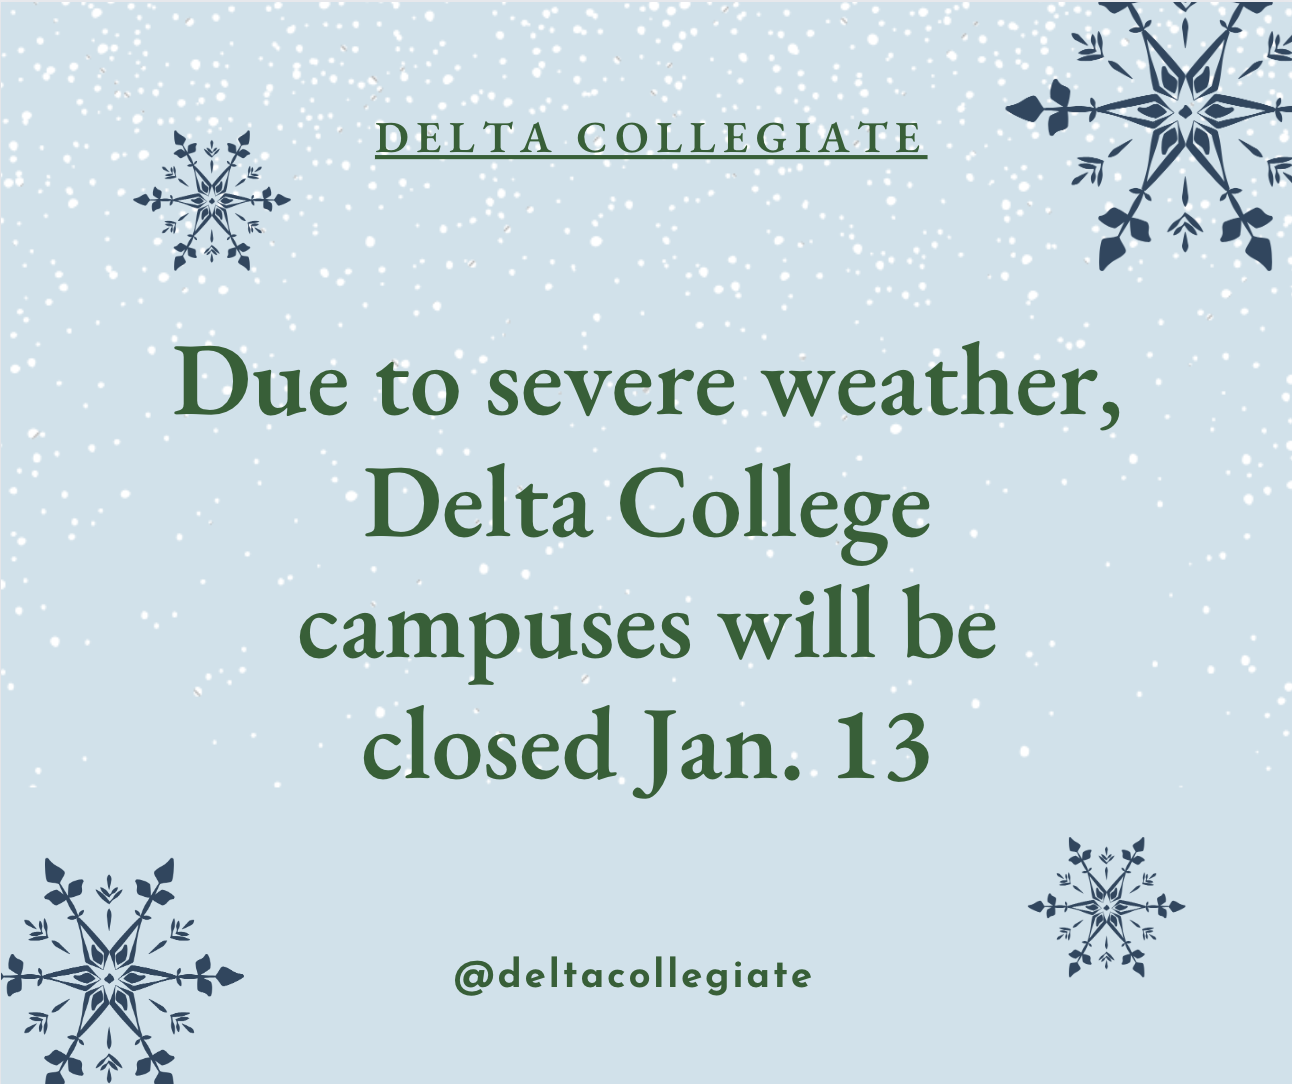 Picture reads: Due to severe weather, Delta College campuses will be closed Jan. 13.